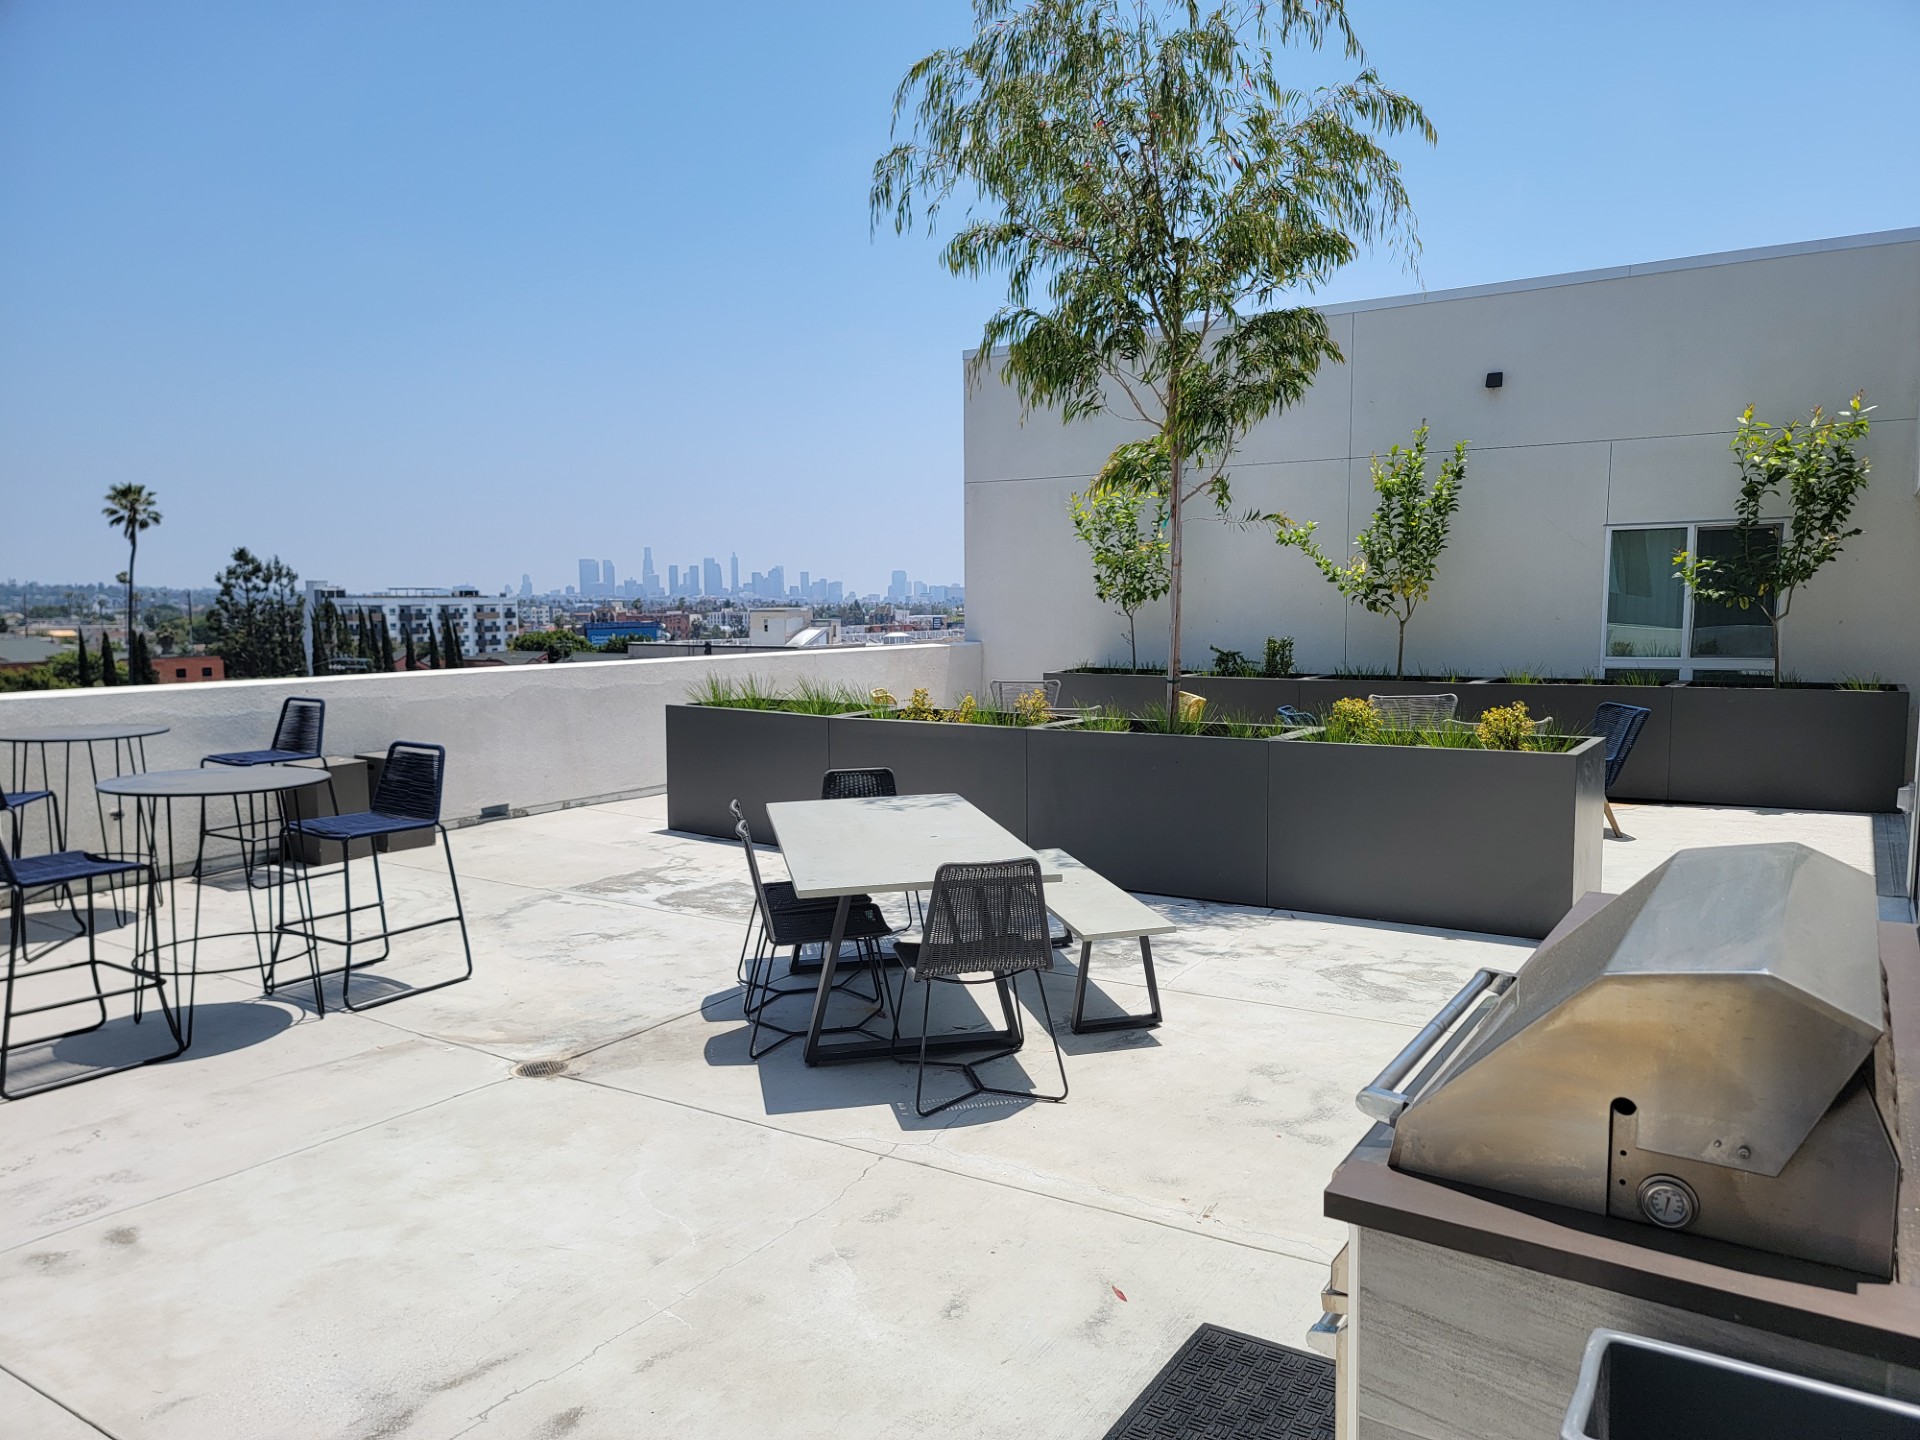 Rooftop Terrace with tables, view of DTLA,